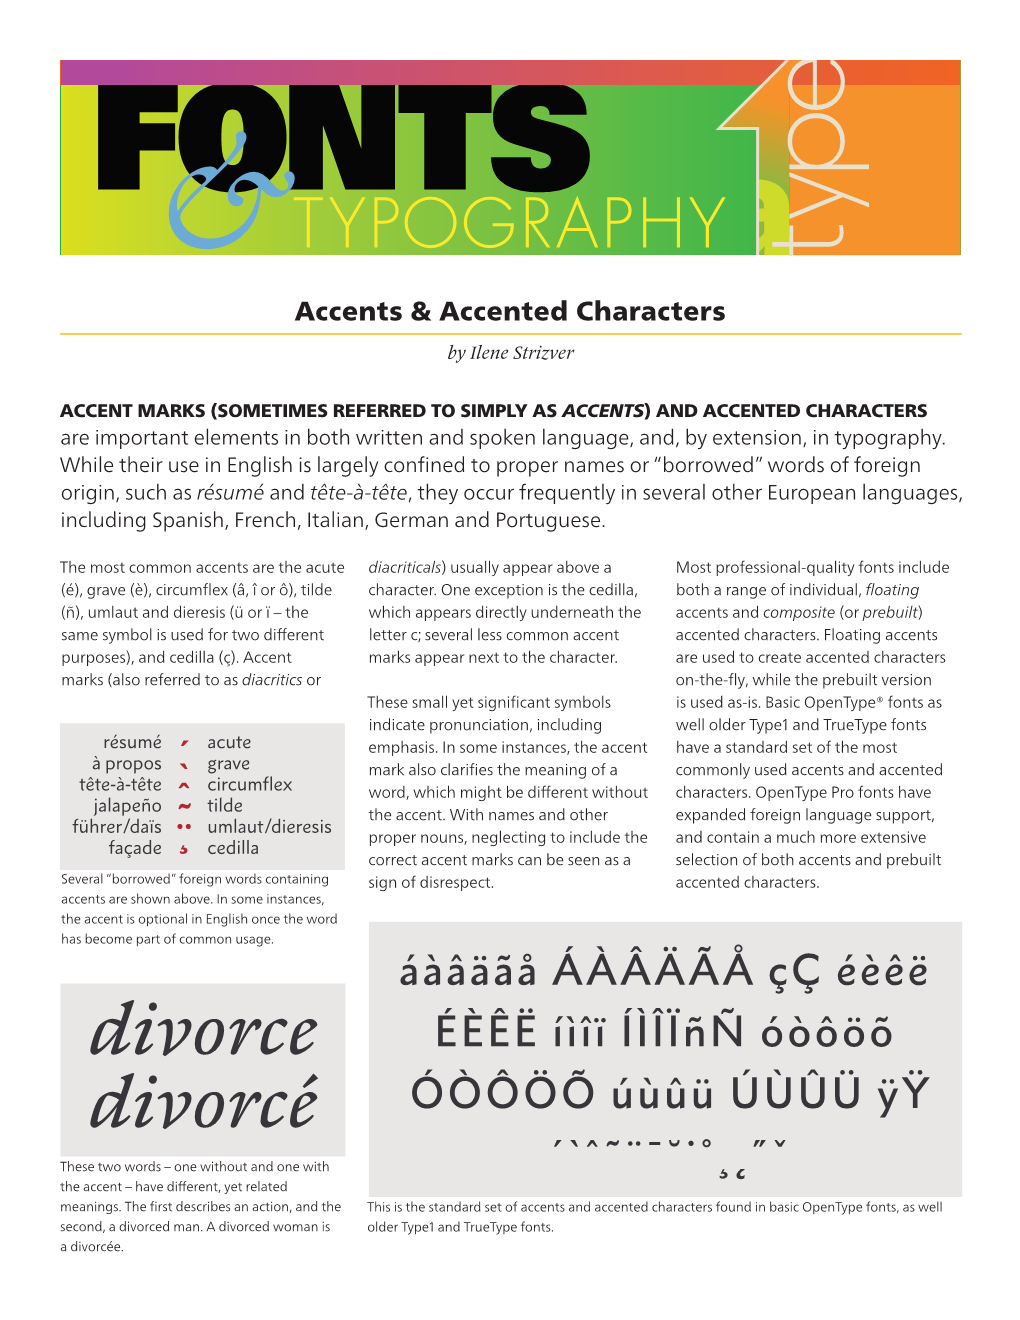 Accents & Accented Characters